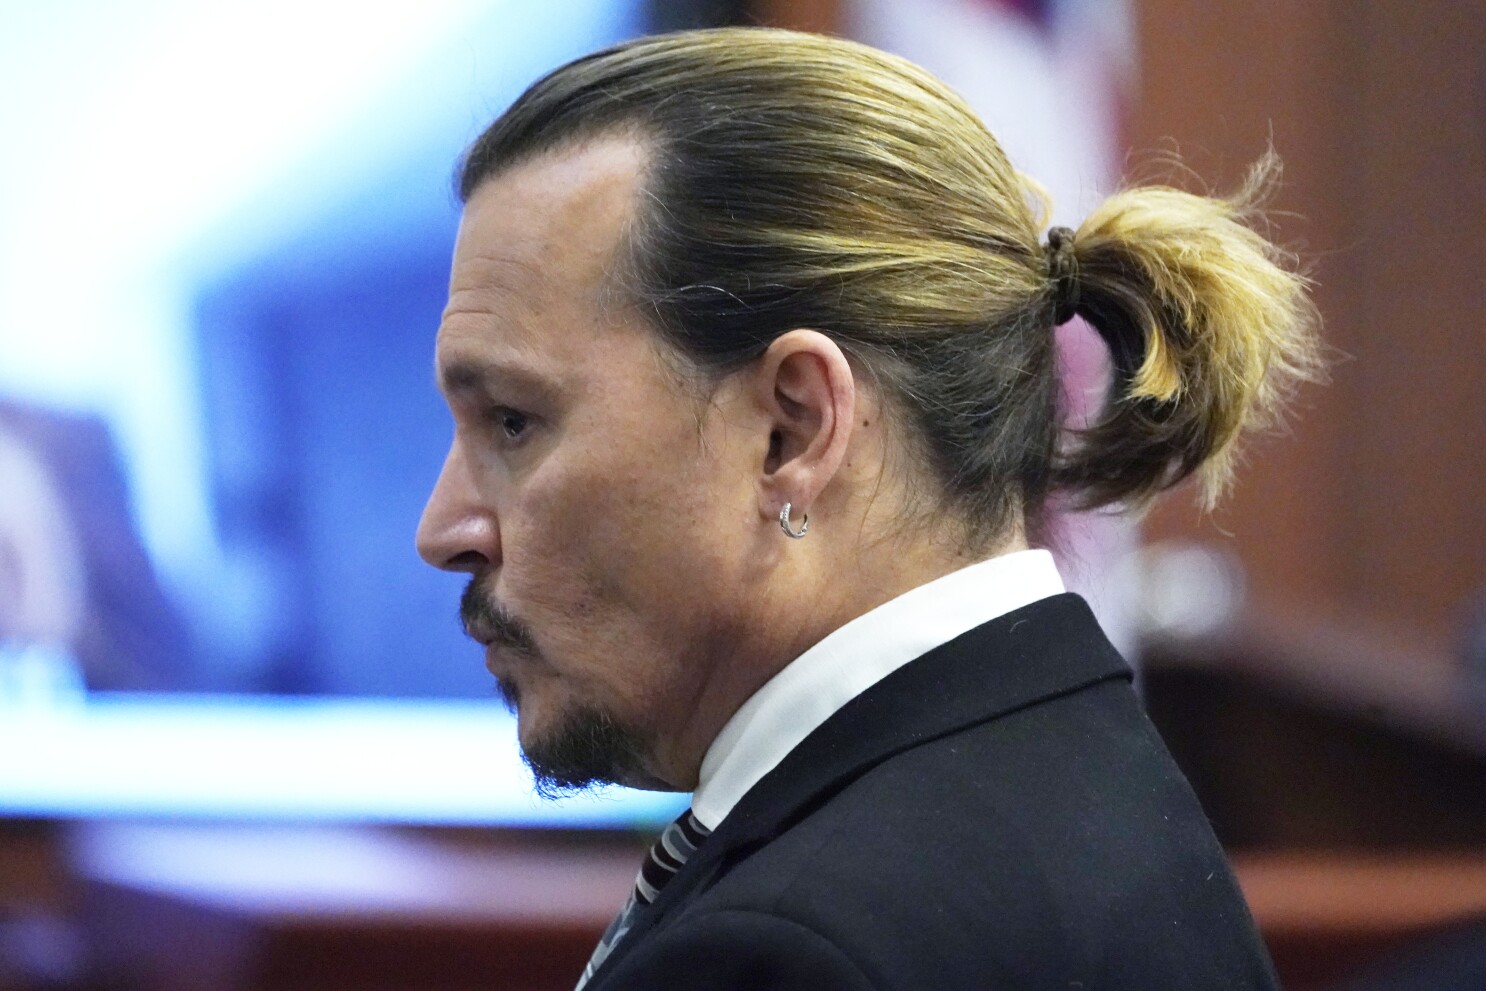 Johnny Depp in black coat with white shirt showing the side view of his ponytail - Johnny Depp latest hairstyles